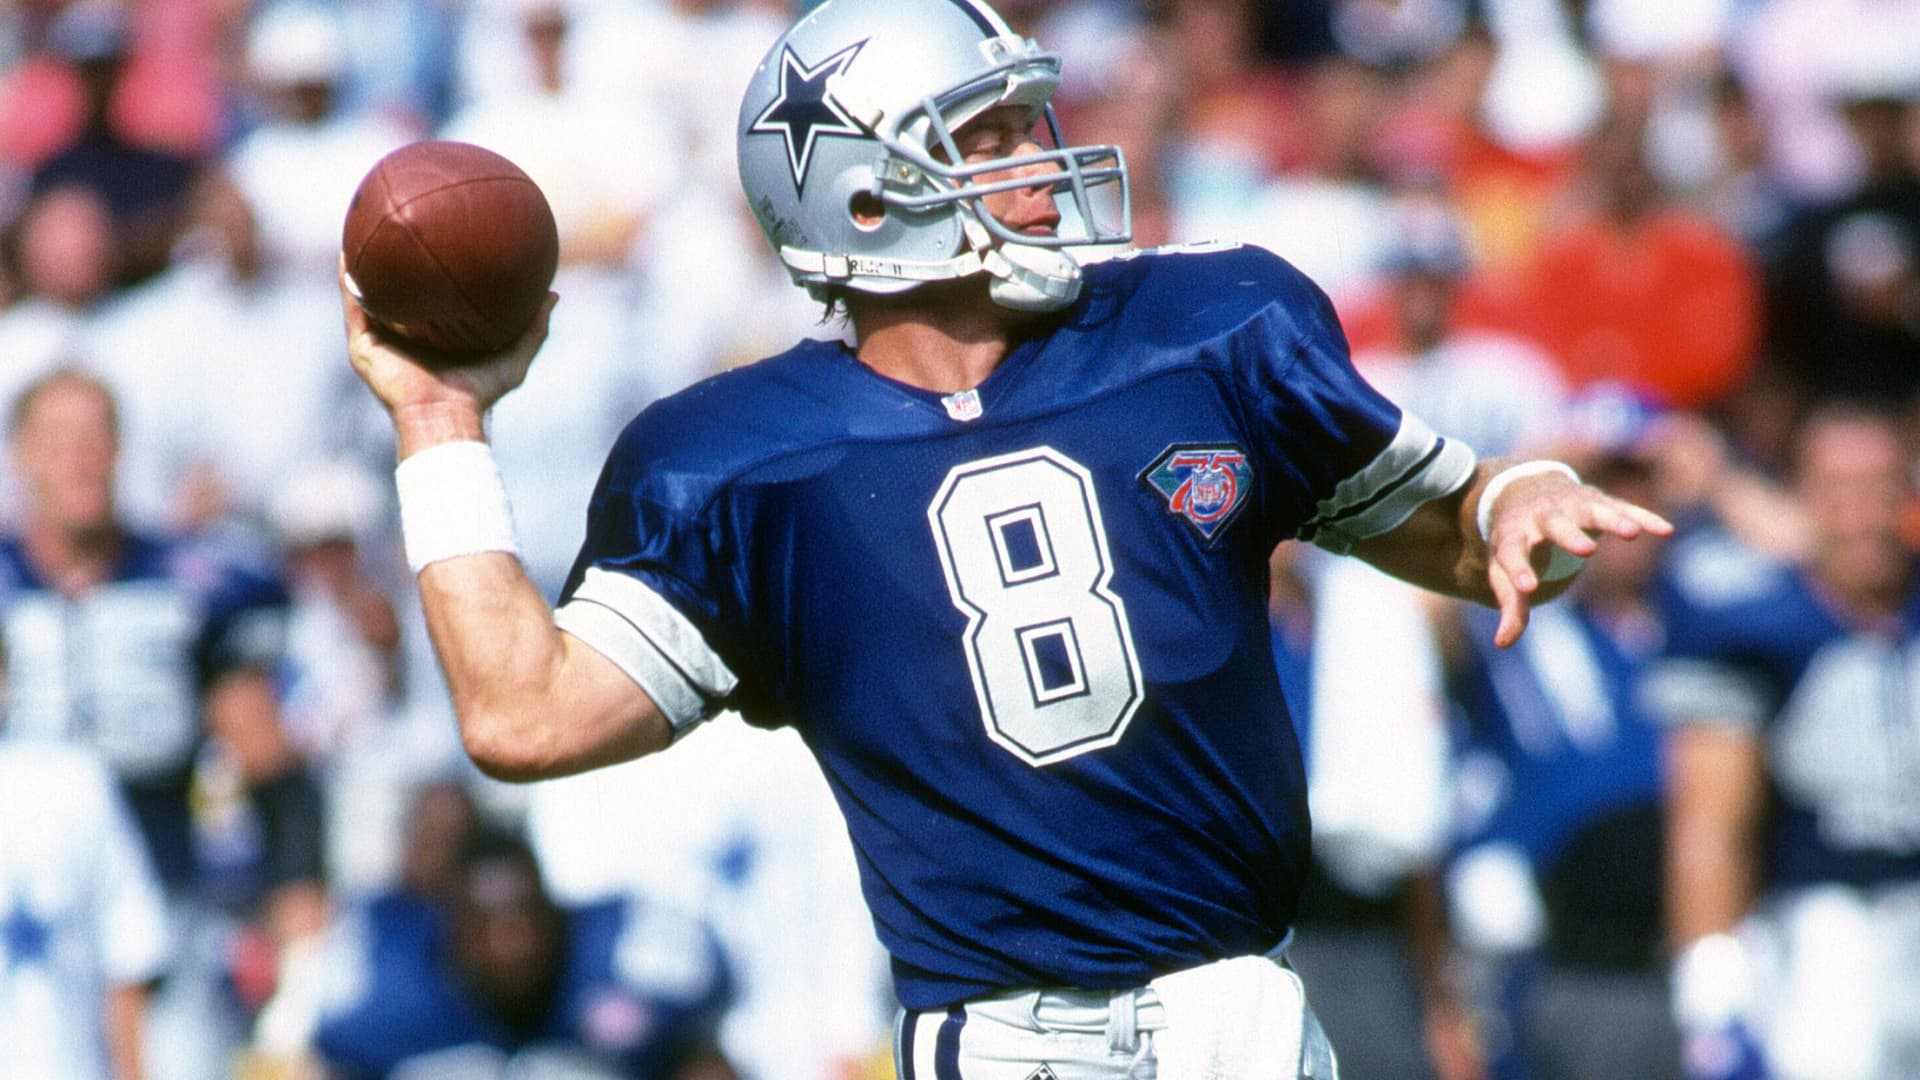 Troy Aikman #8 of the Dallas Cowboys throws a pass against the Washington Redskins during an NFL football game October 2, 1994 at RFK Stadium in Washington, D.C.